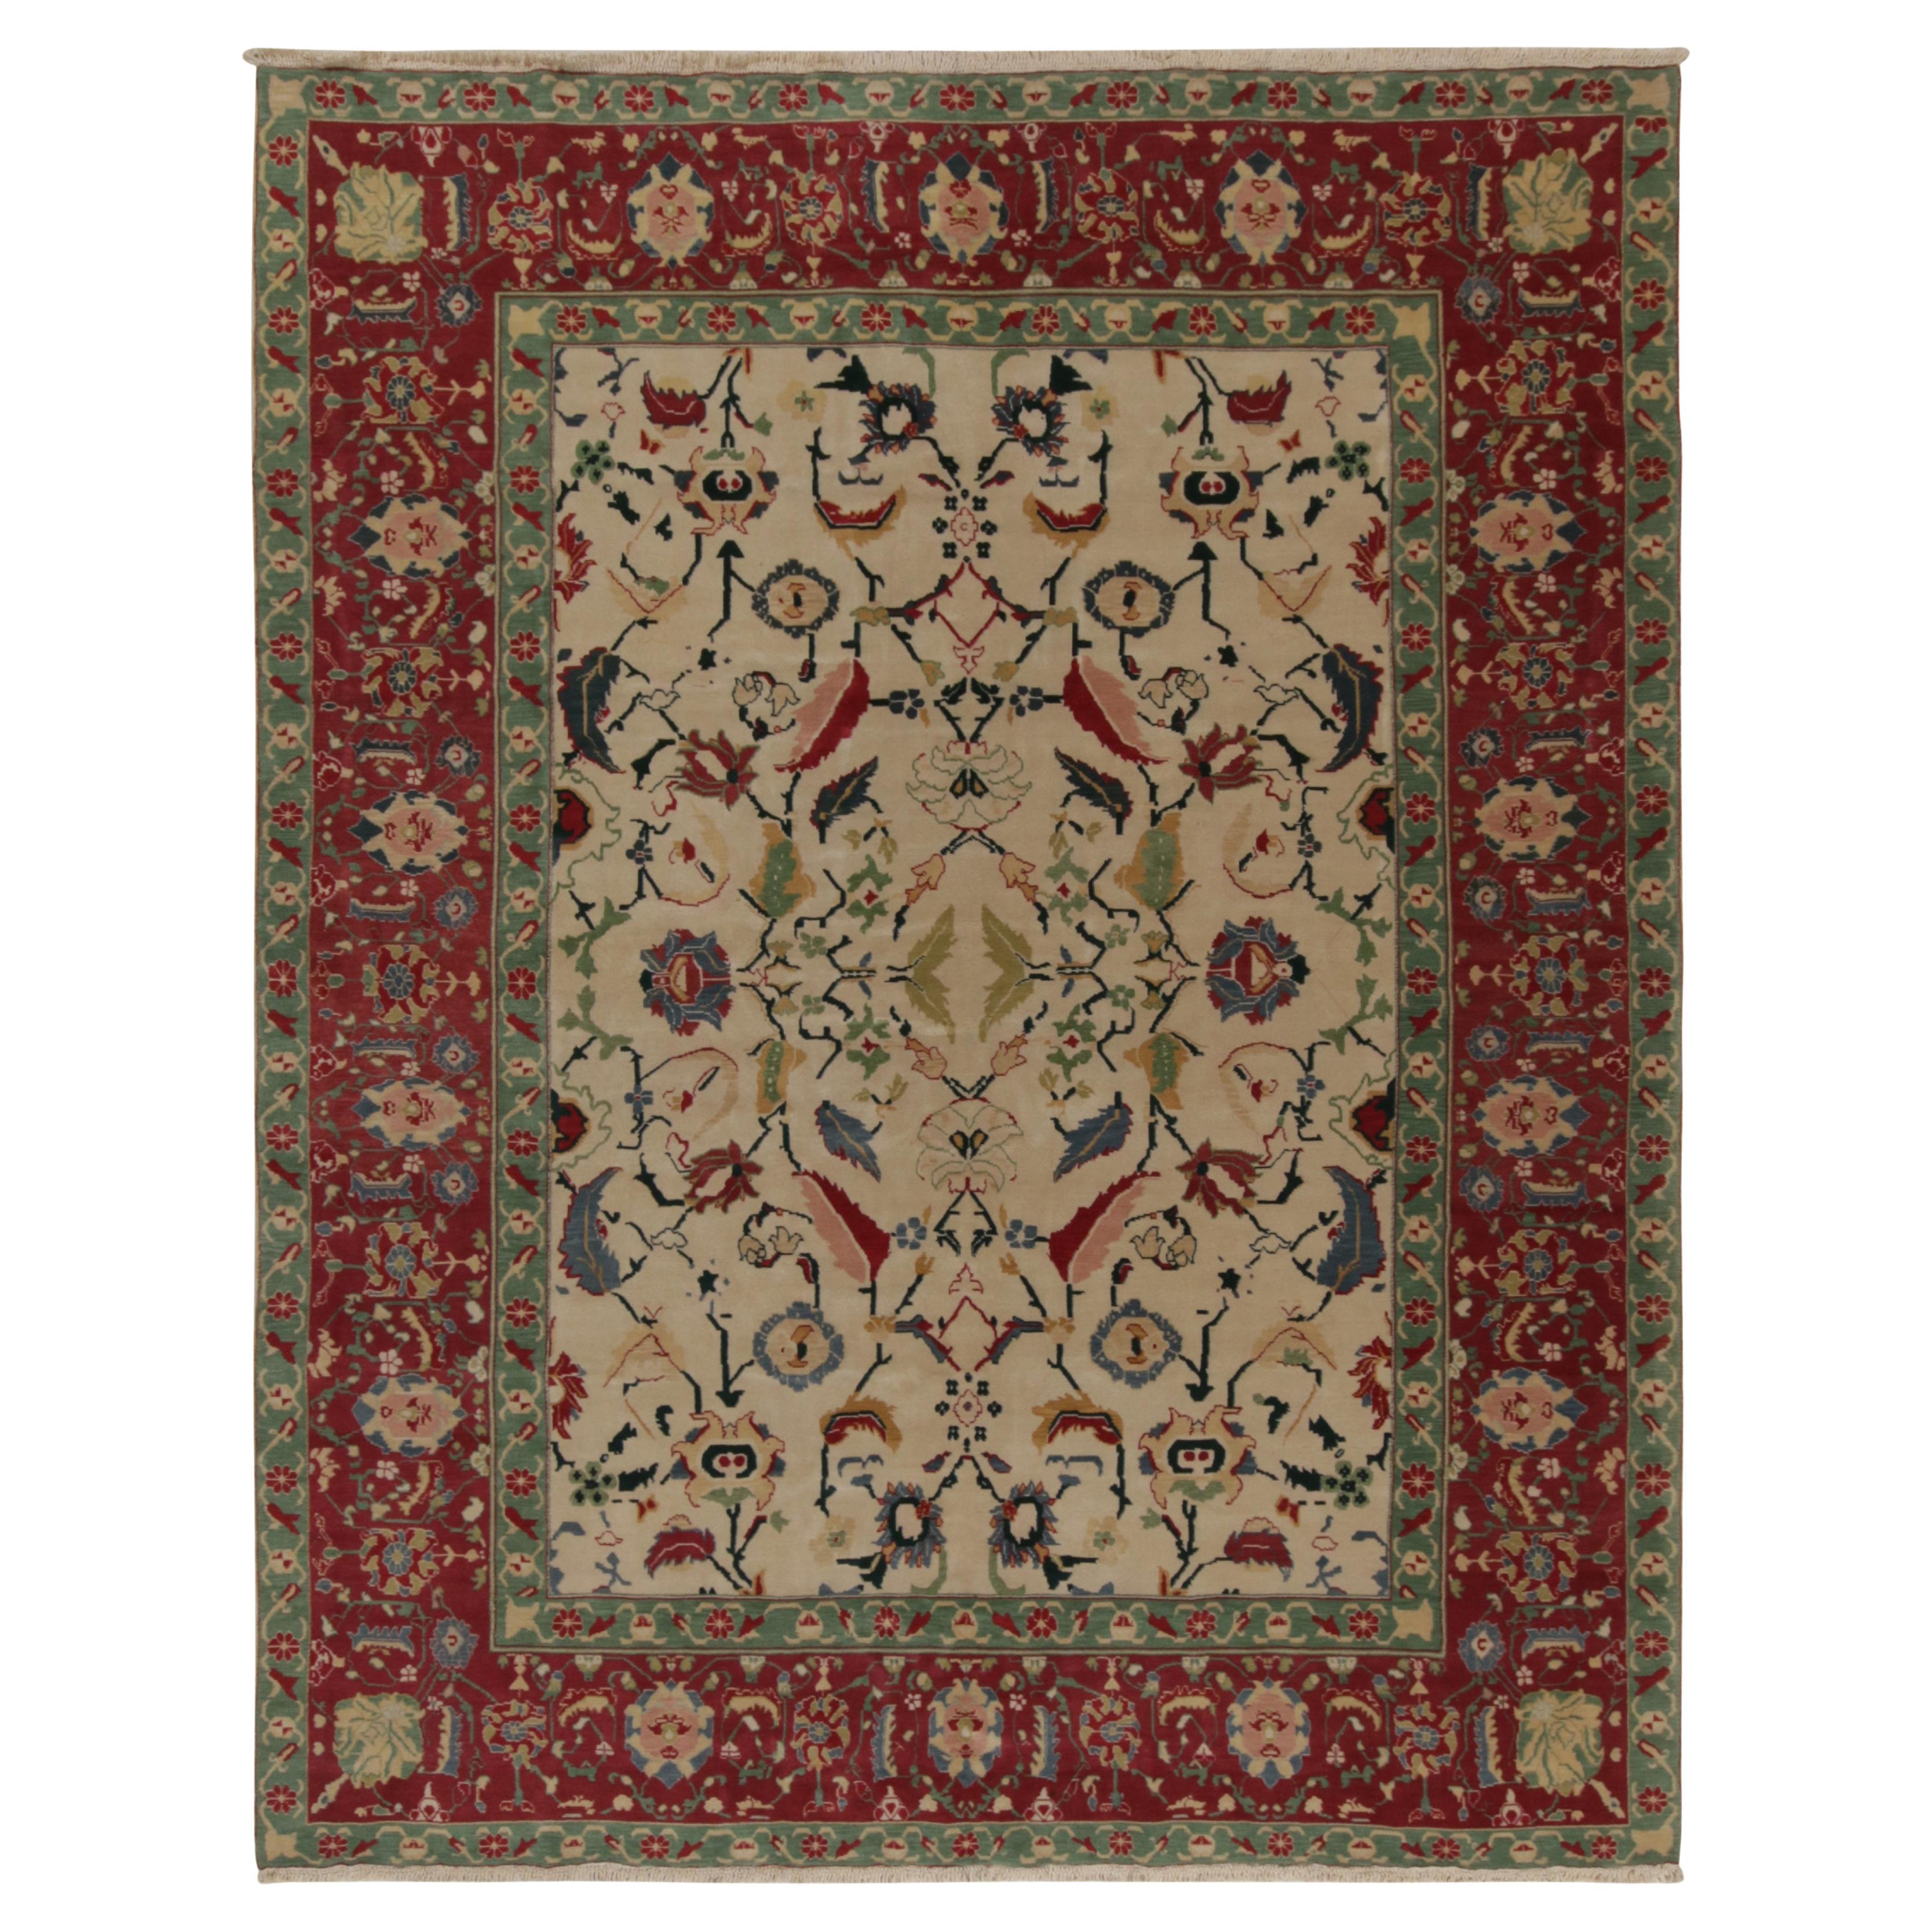 Rug & Kilim’s Traditional Agra style rug in Beige, Red and Teal Floral Pattern